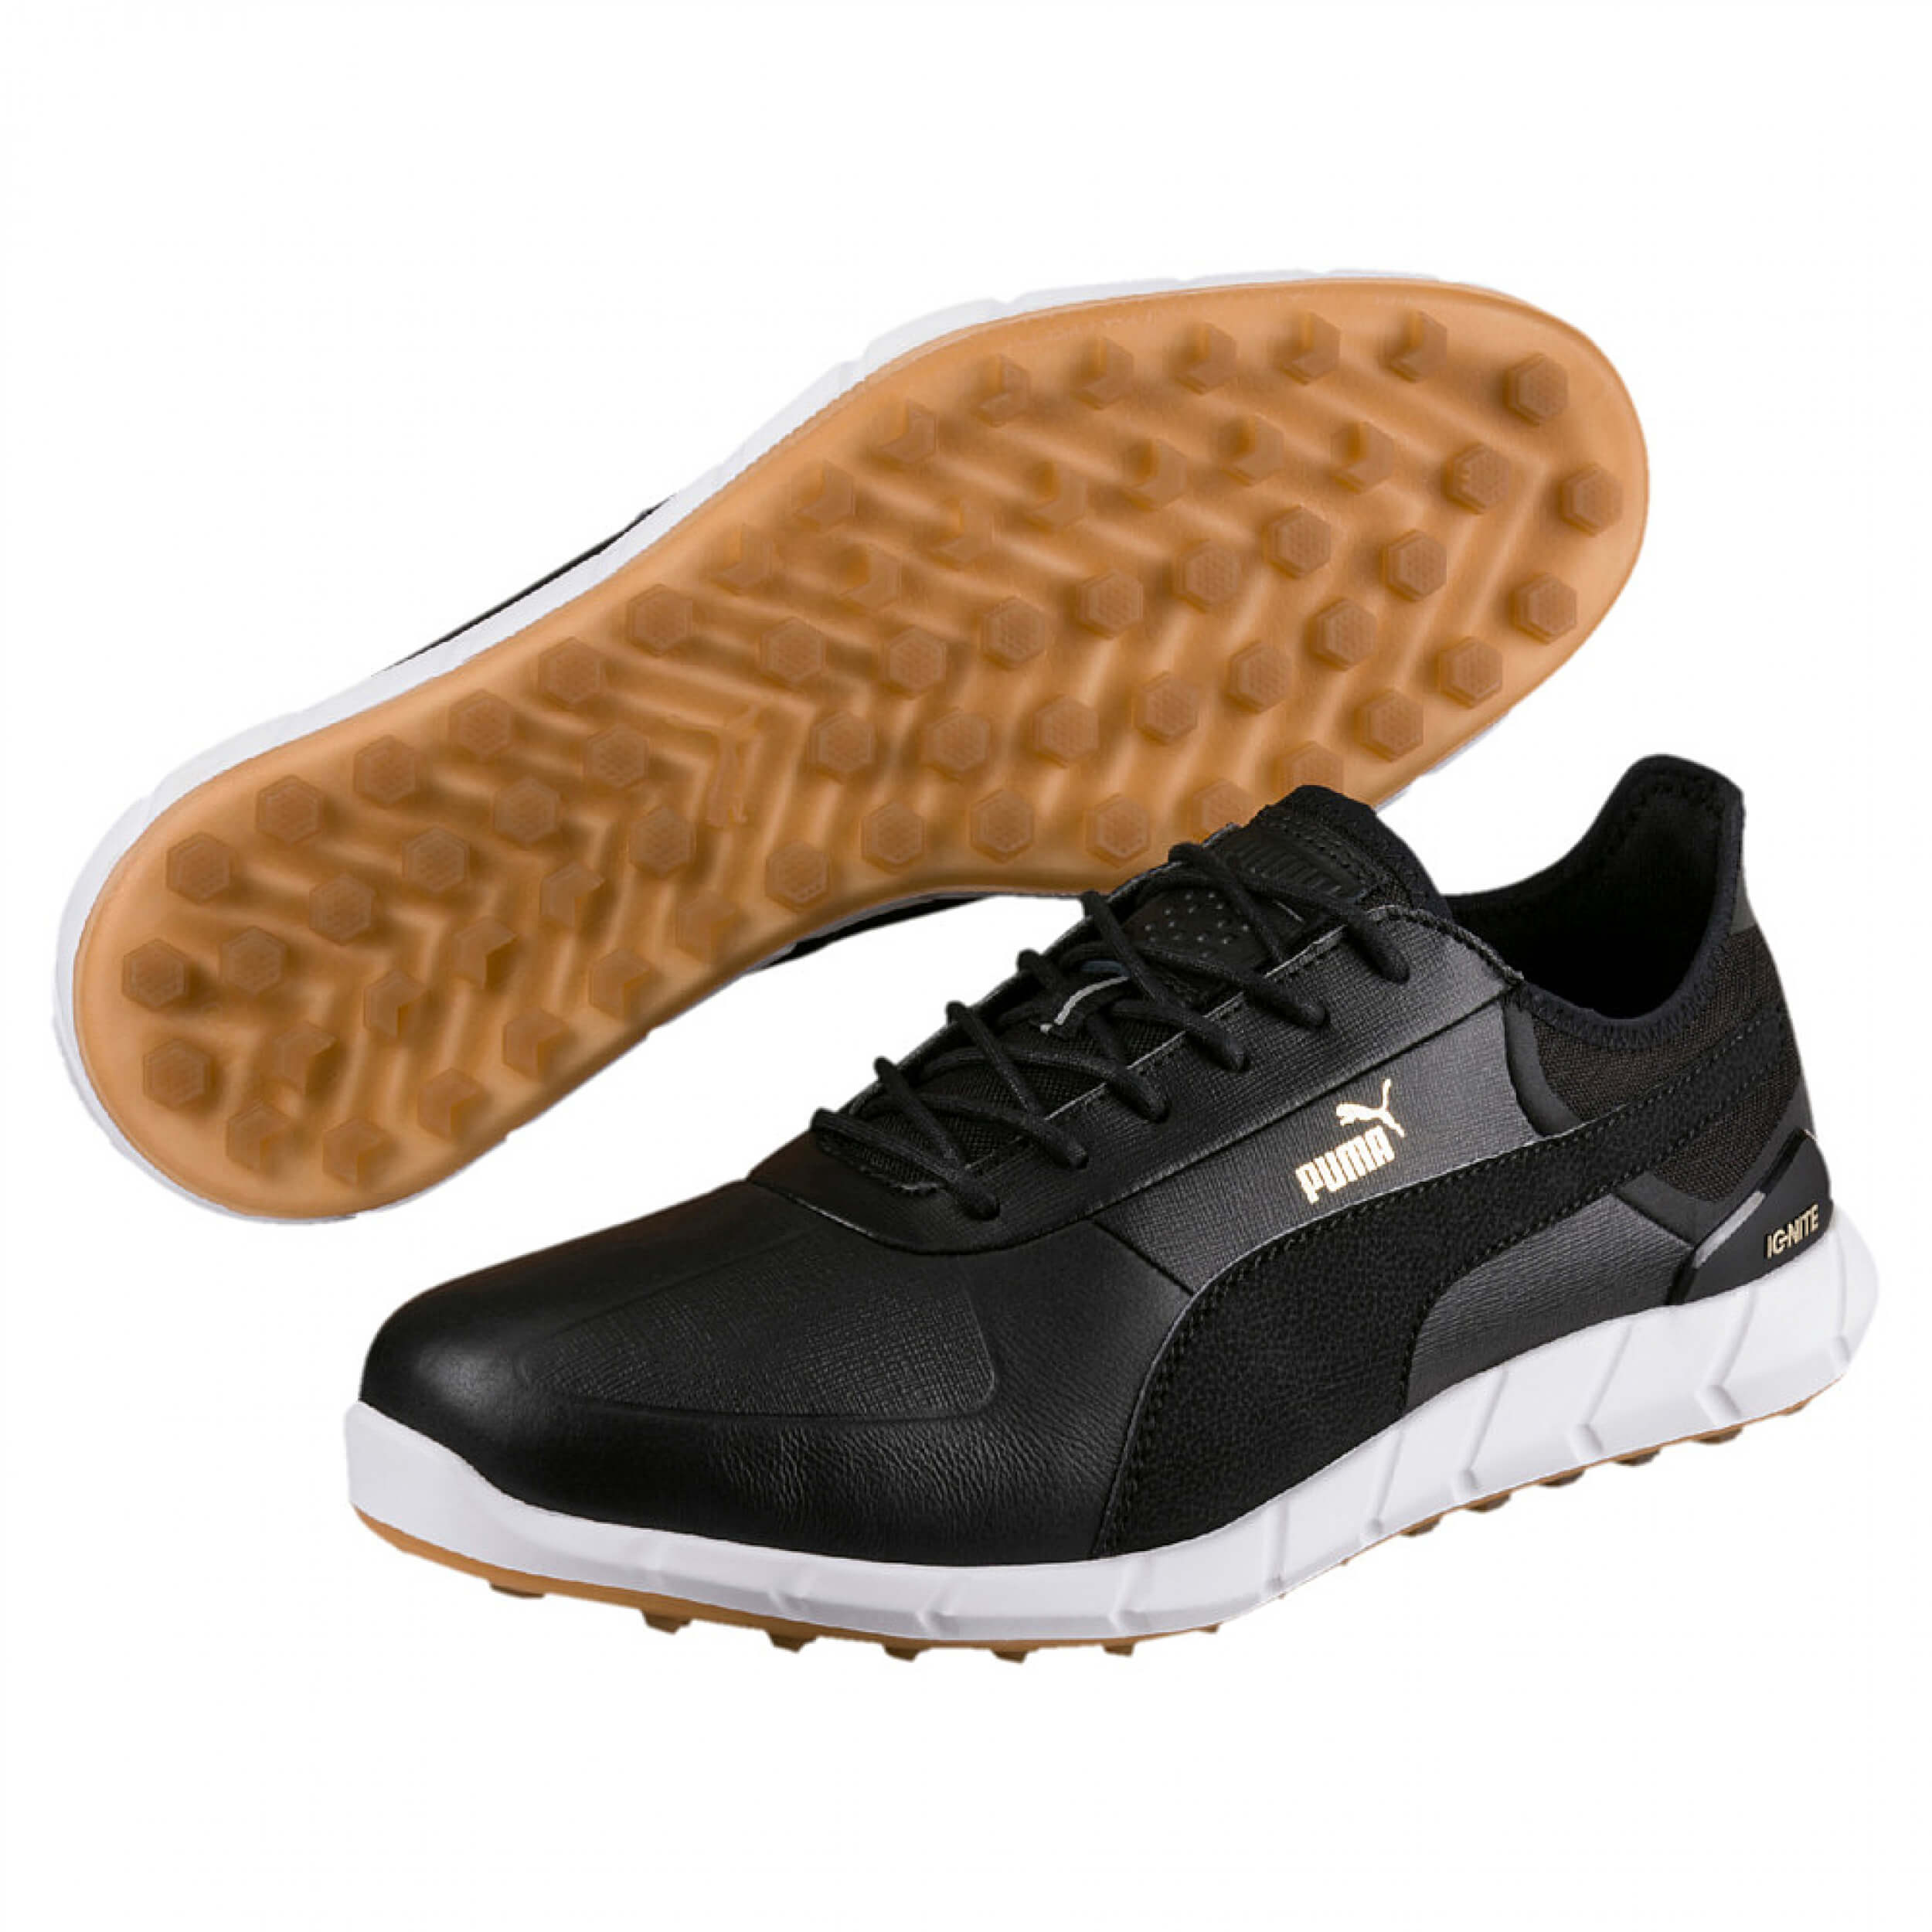 Golf Shoese Ignite Spikeless Lux 